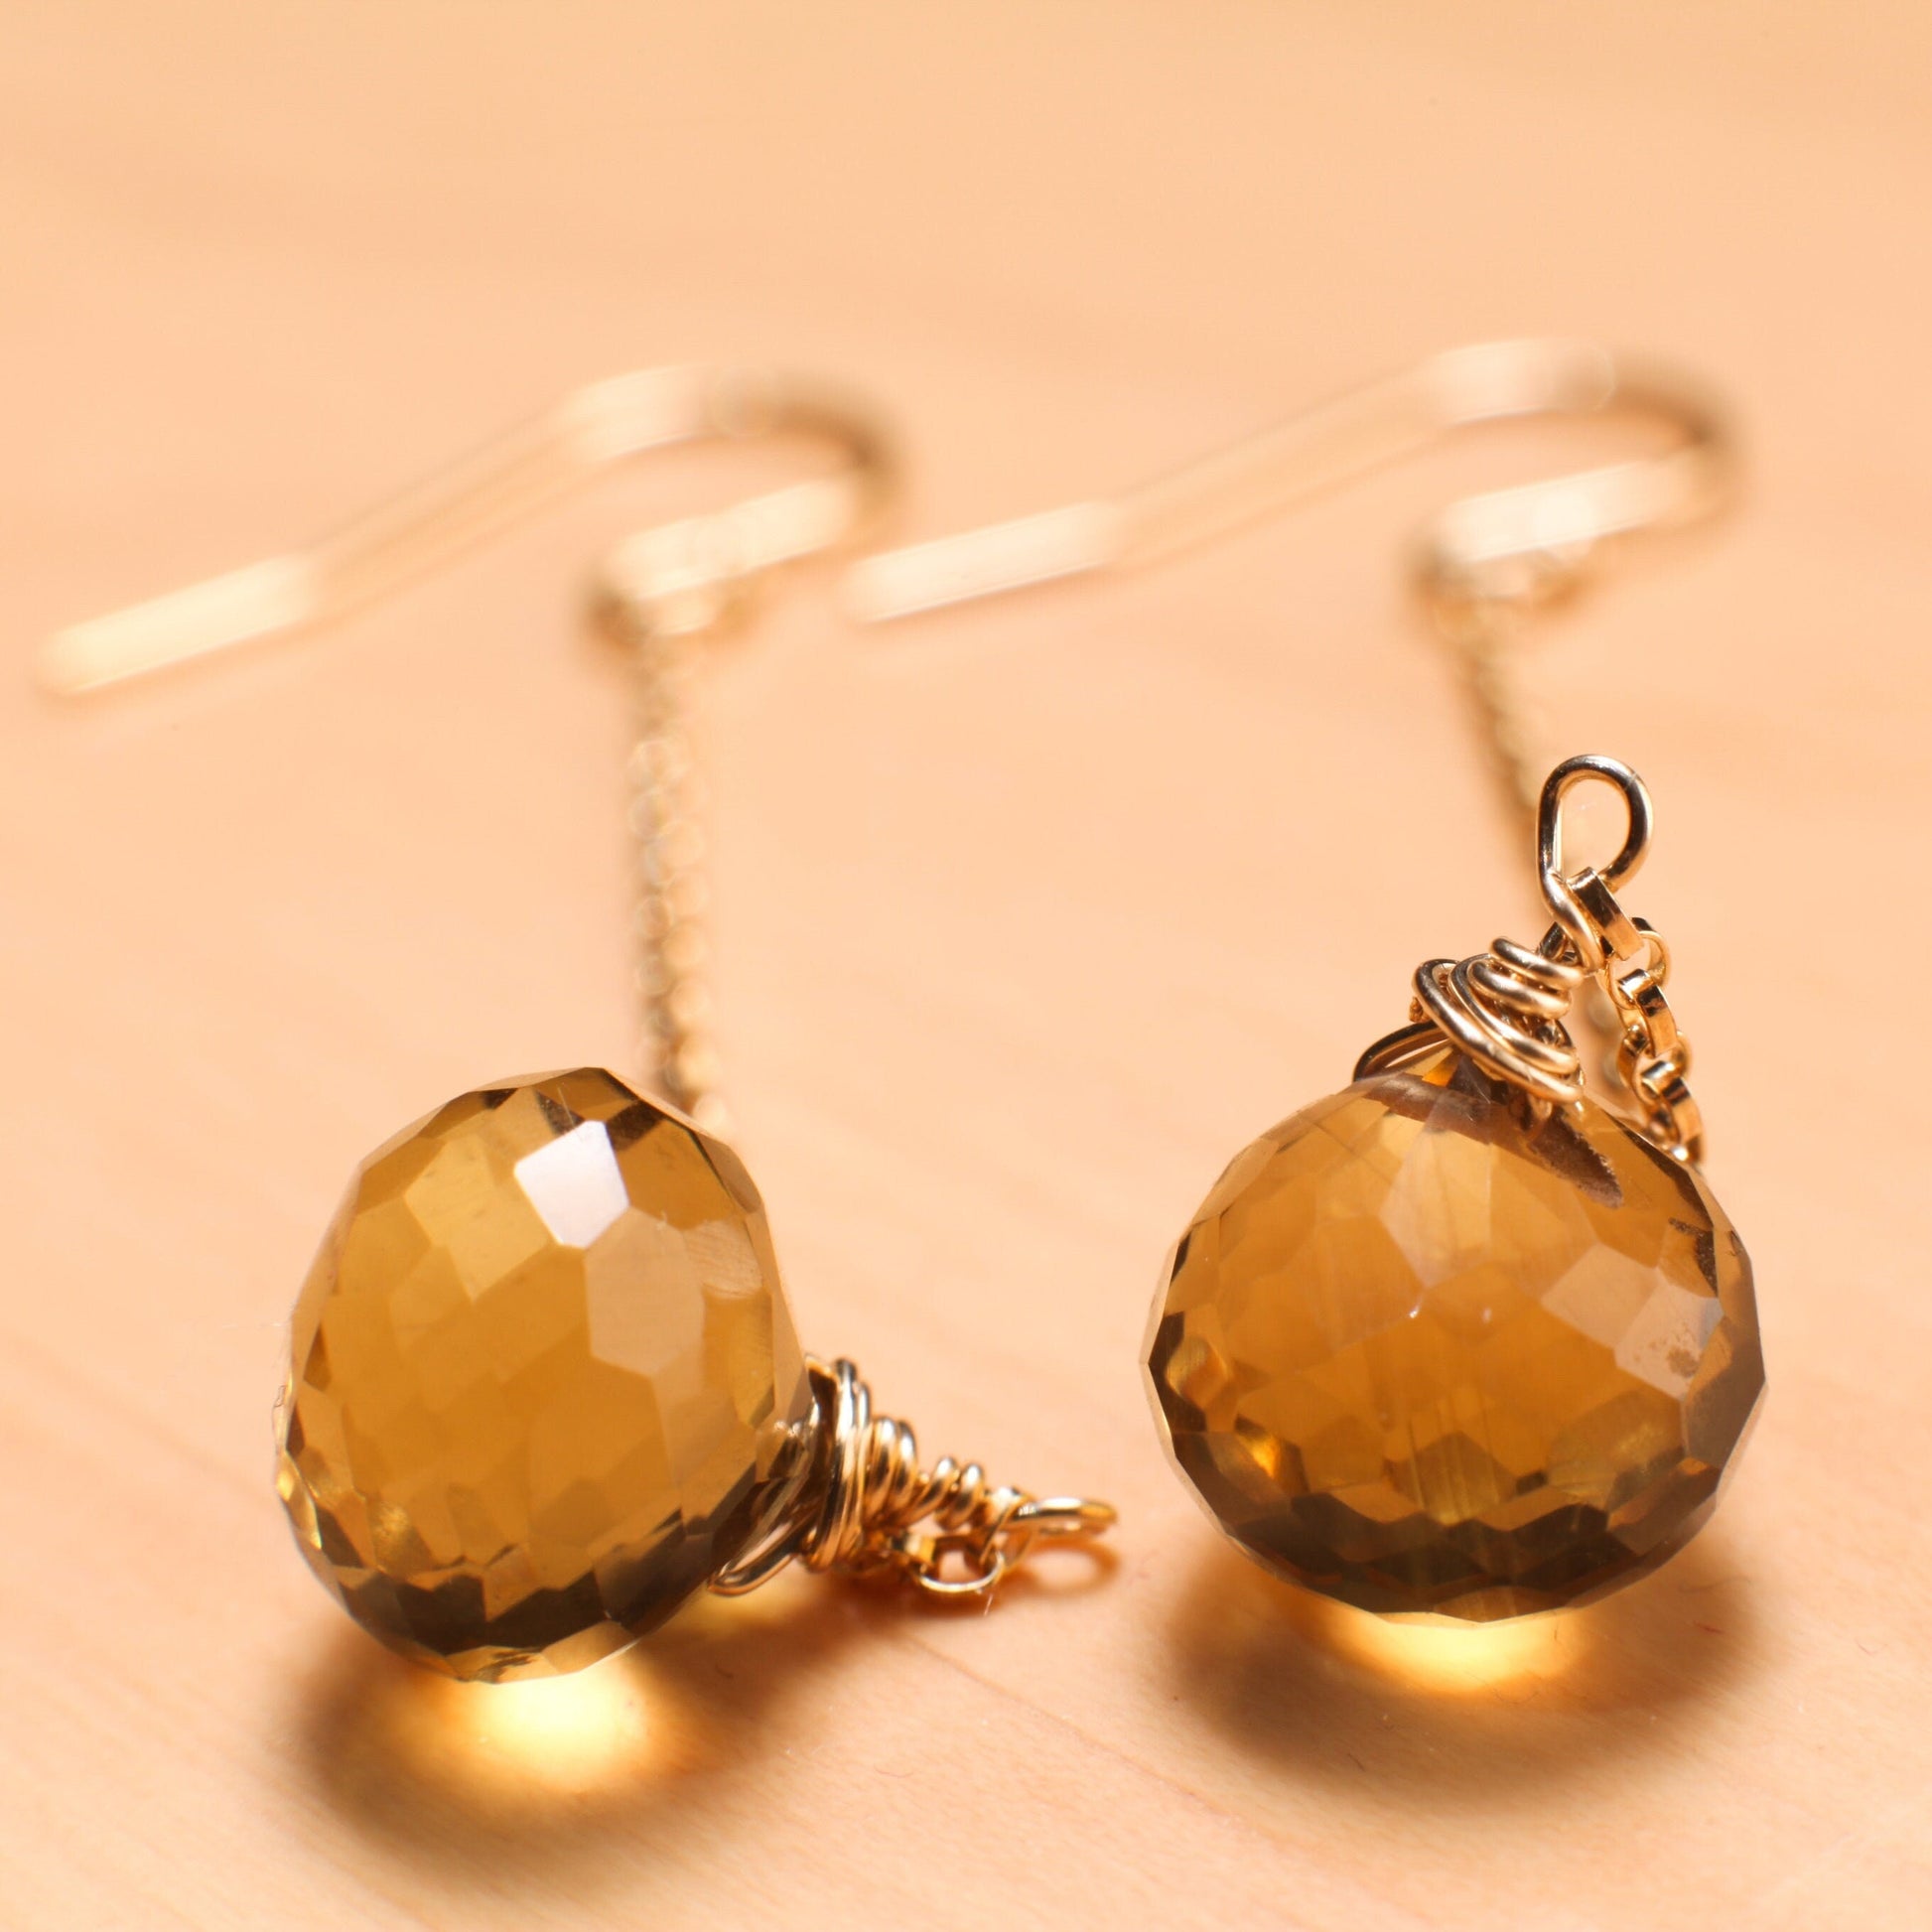 Whiskey Quartz 9x10mm Onion Shape Wire Wrapped Briolette Dangle with 14K Gold Filled Chain and Earwire, Gemstone Handmade Earrings Gift